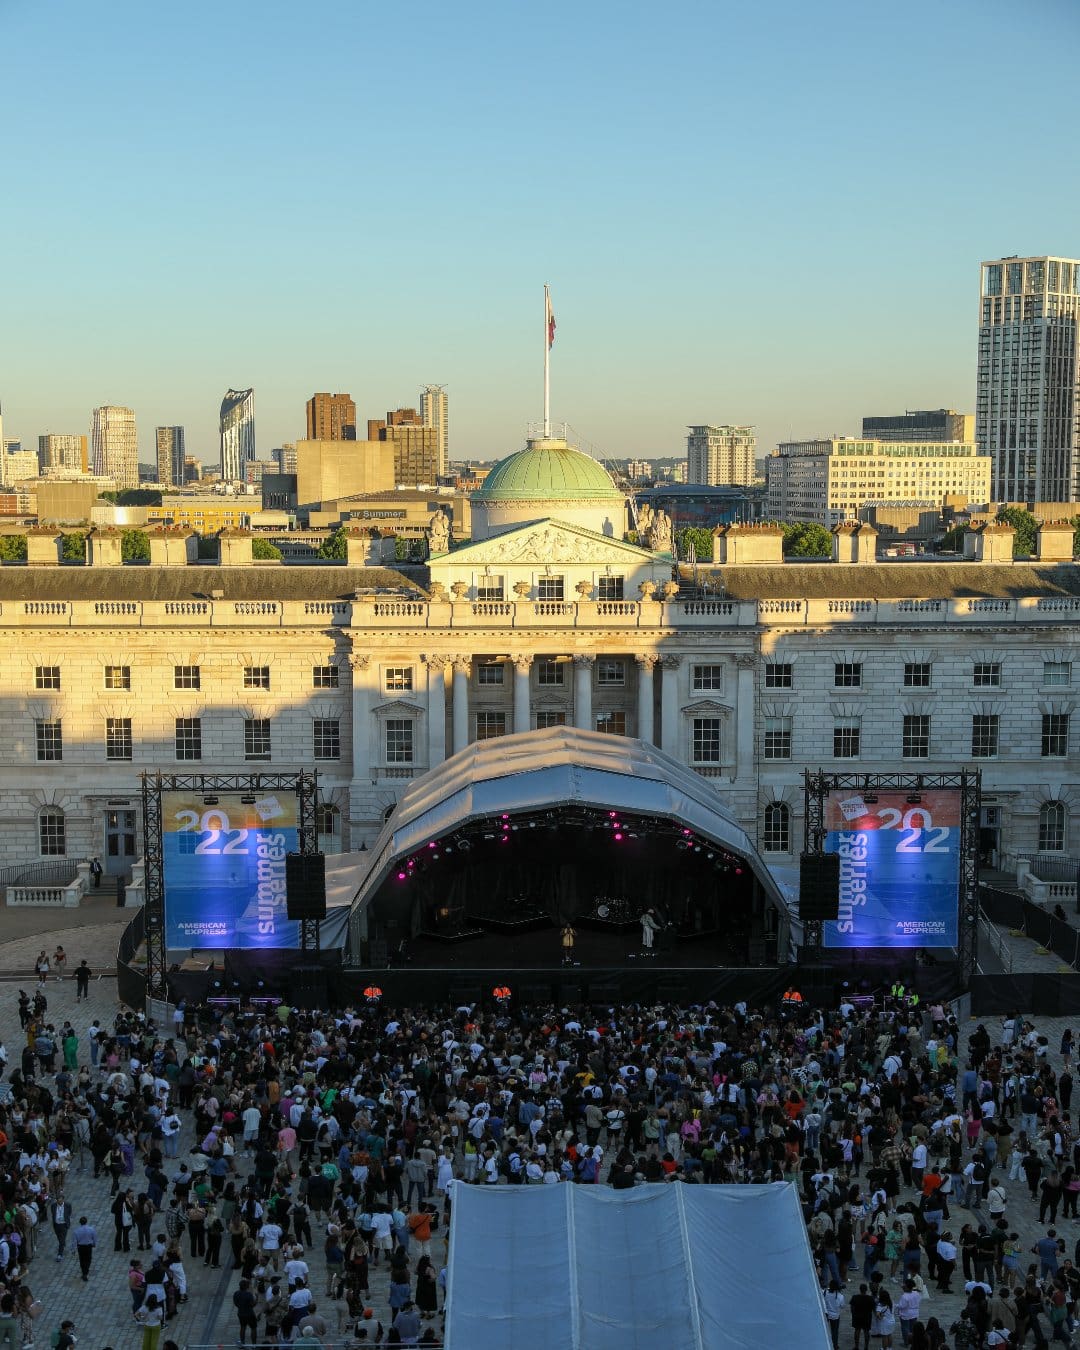 Somerset House Summer Series crowd at sunset